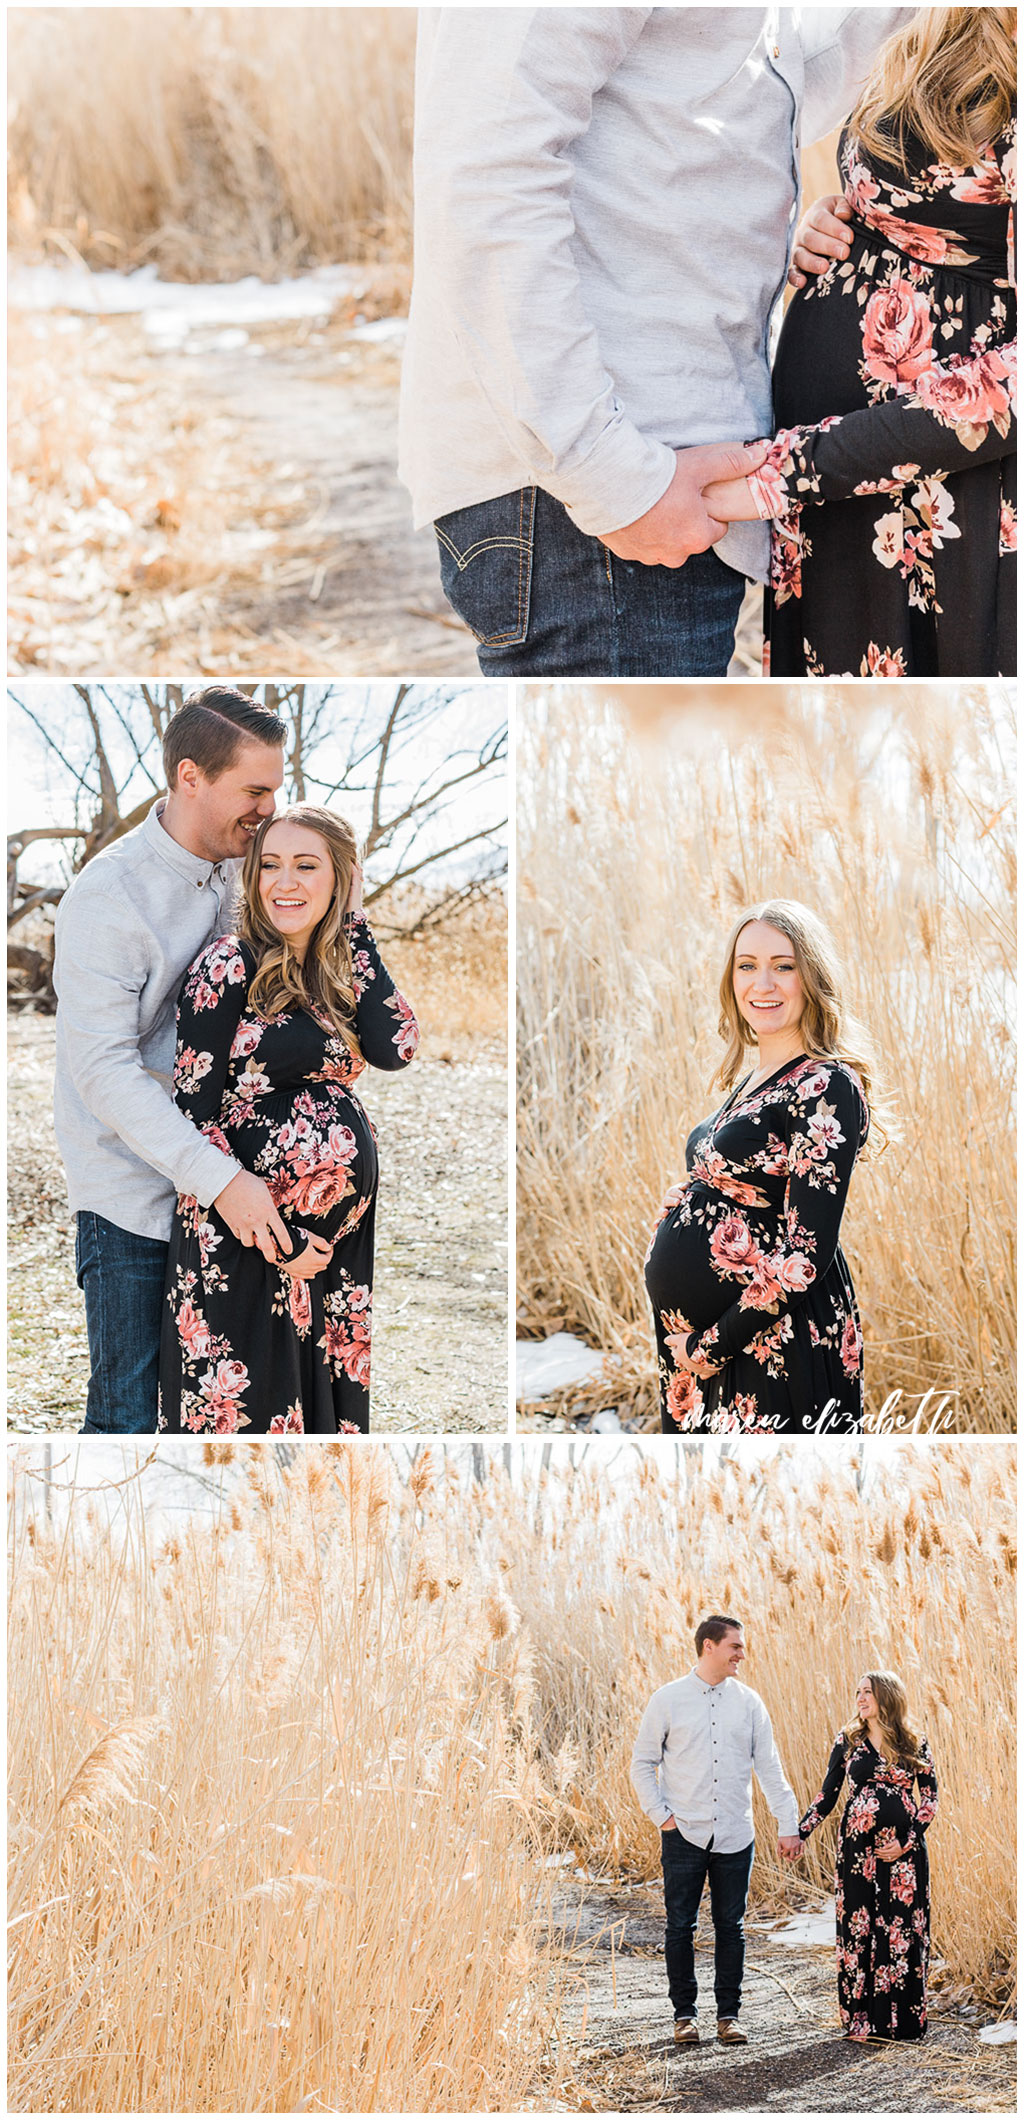 Maternity Session - Show Off the Bump